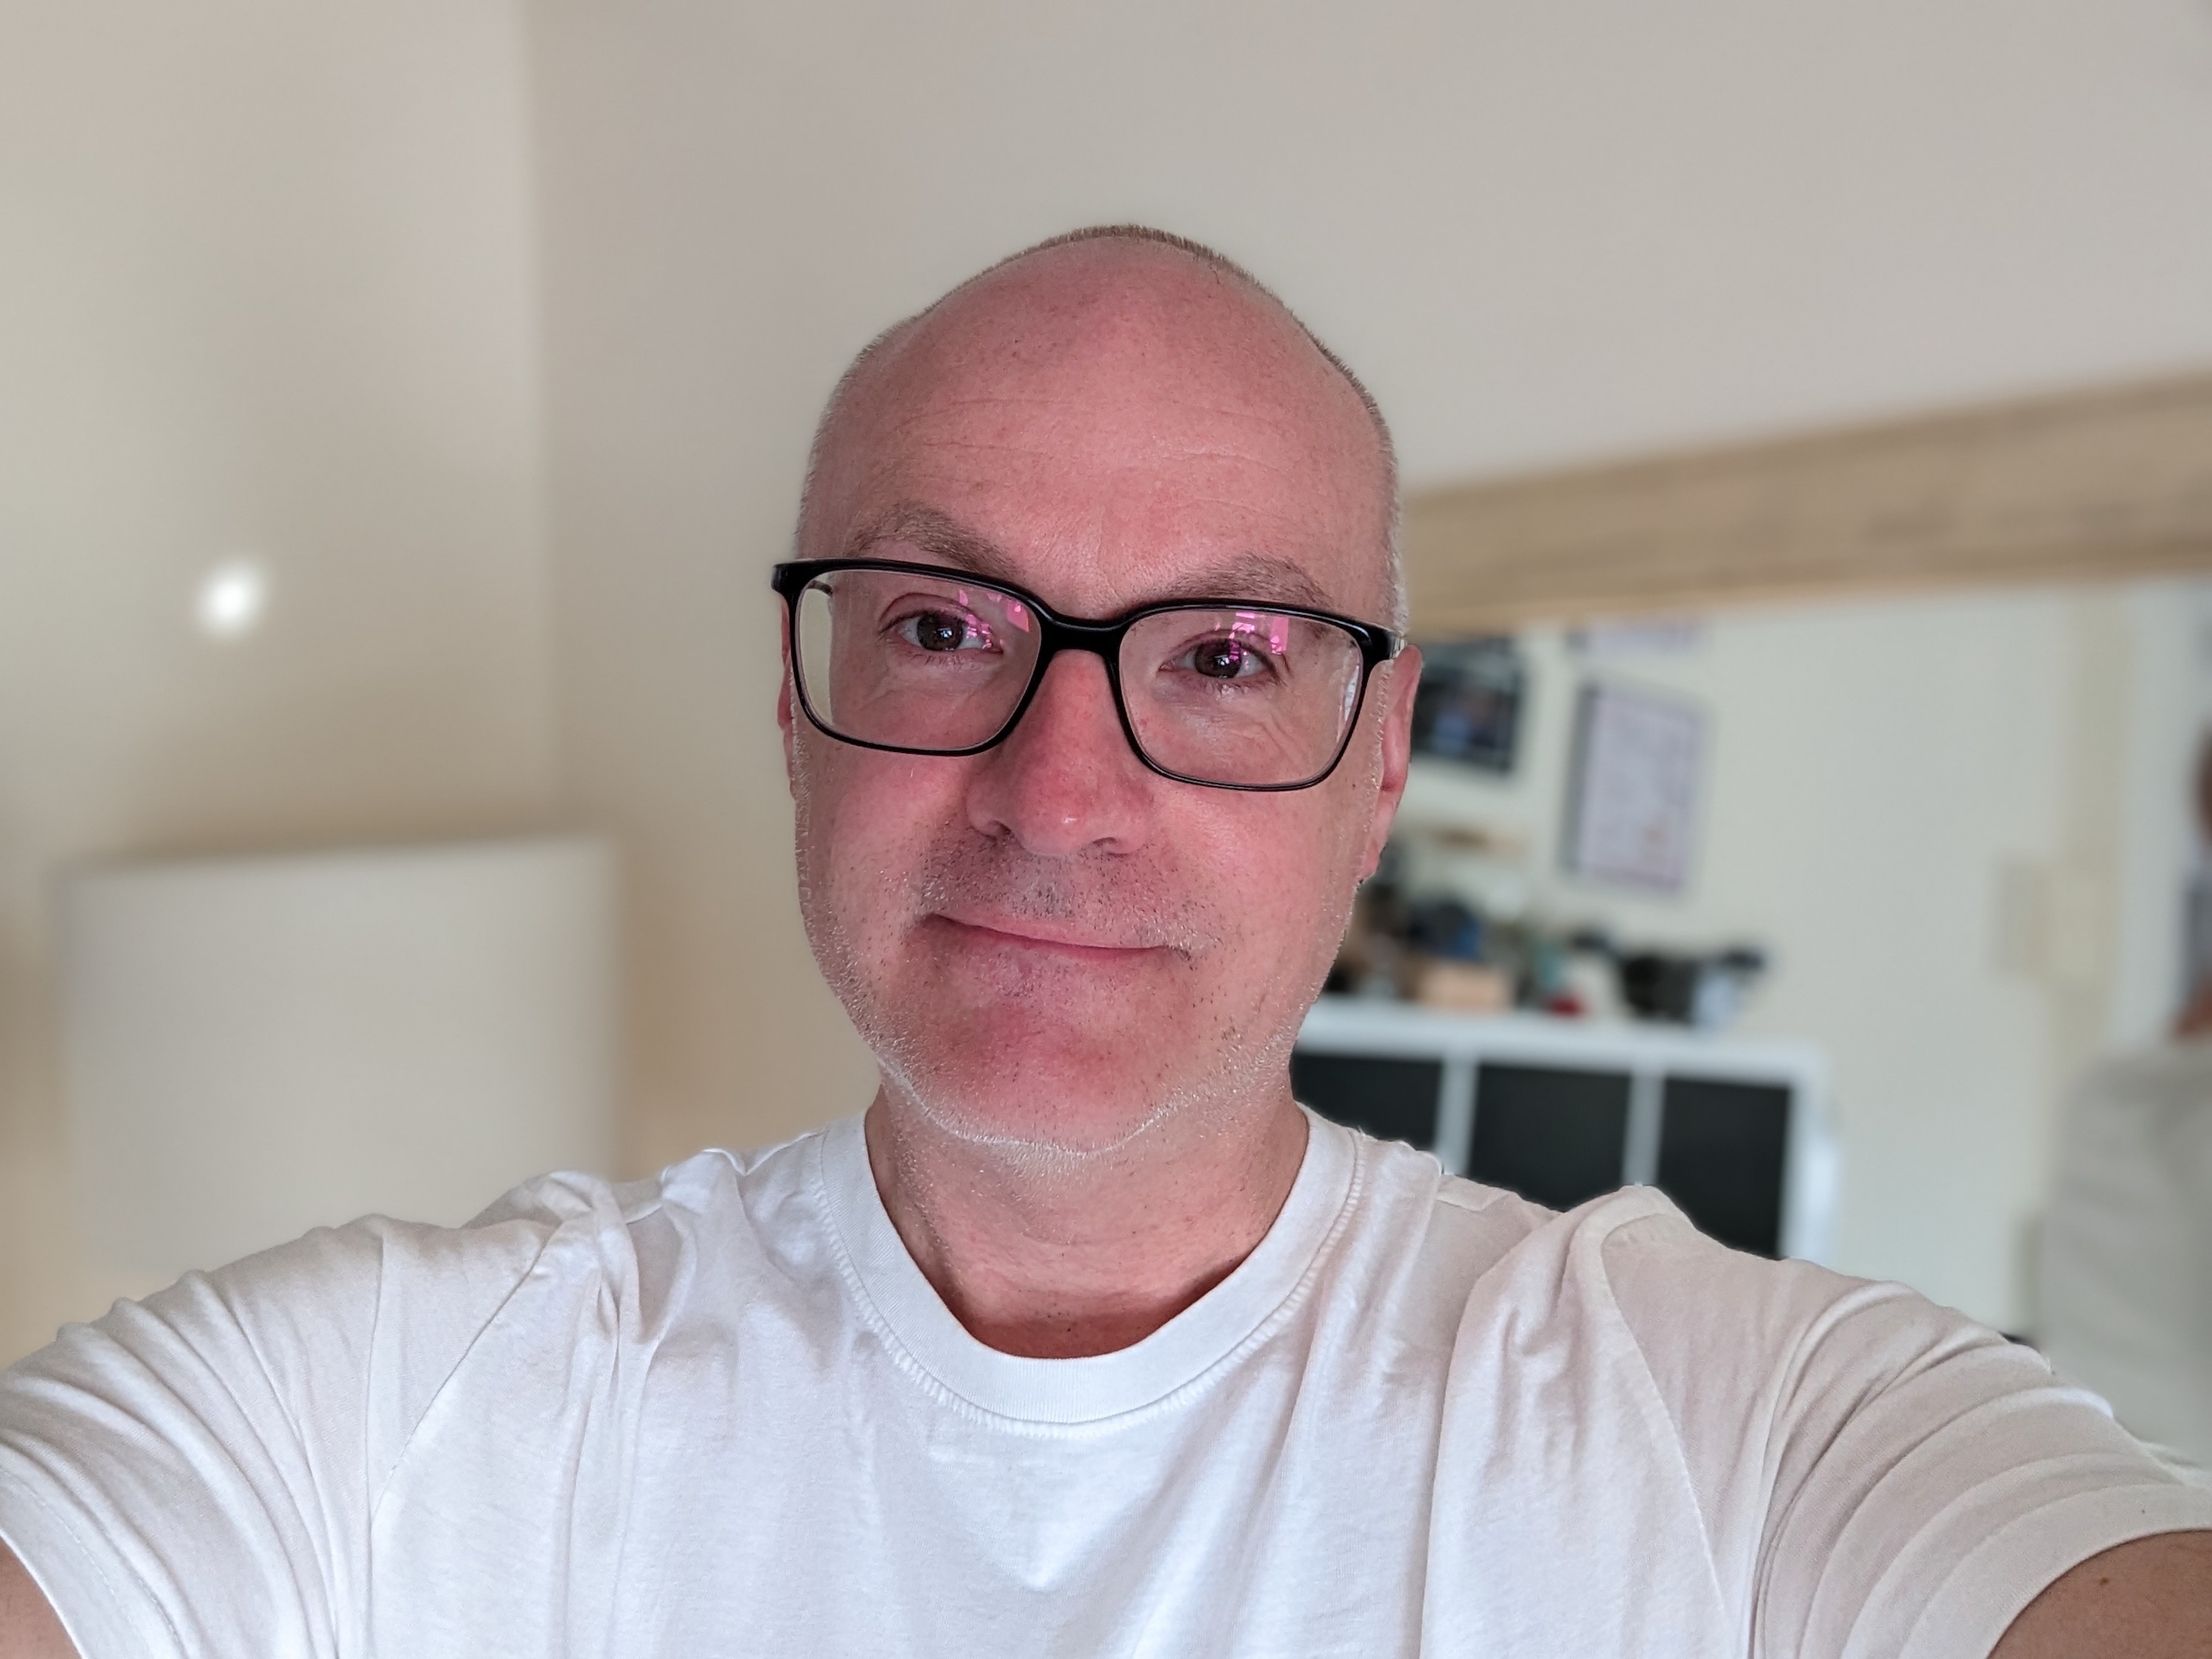 Selfie taken with the Google Pixel 7's front camera, using Portrait mode.